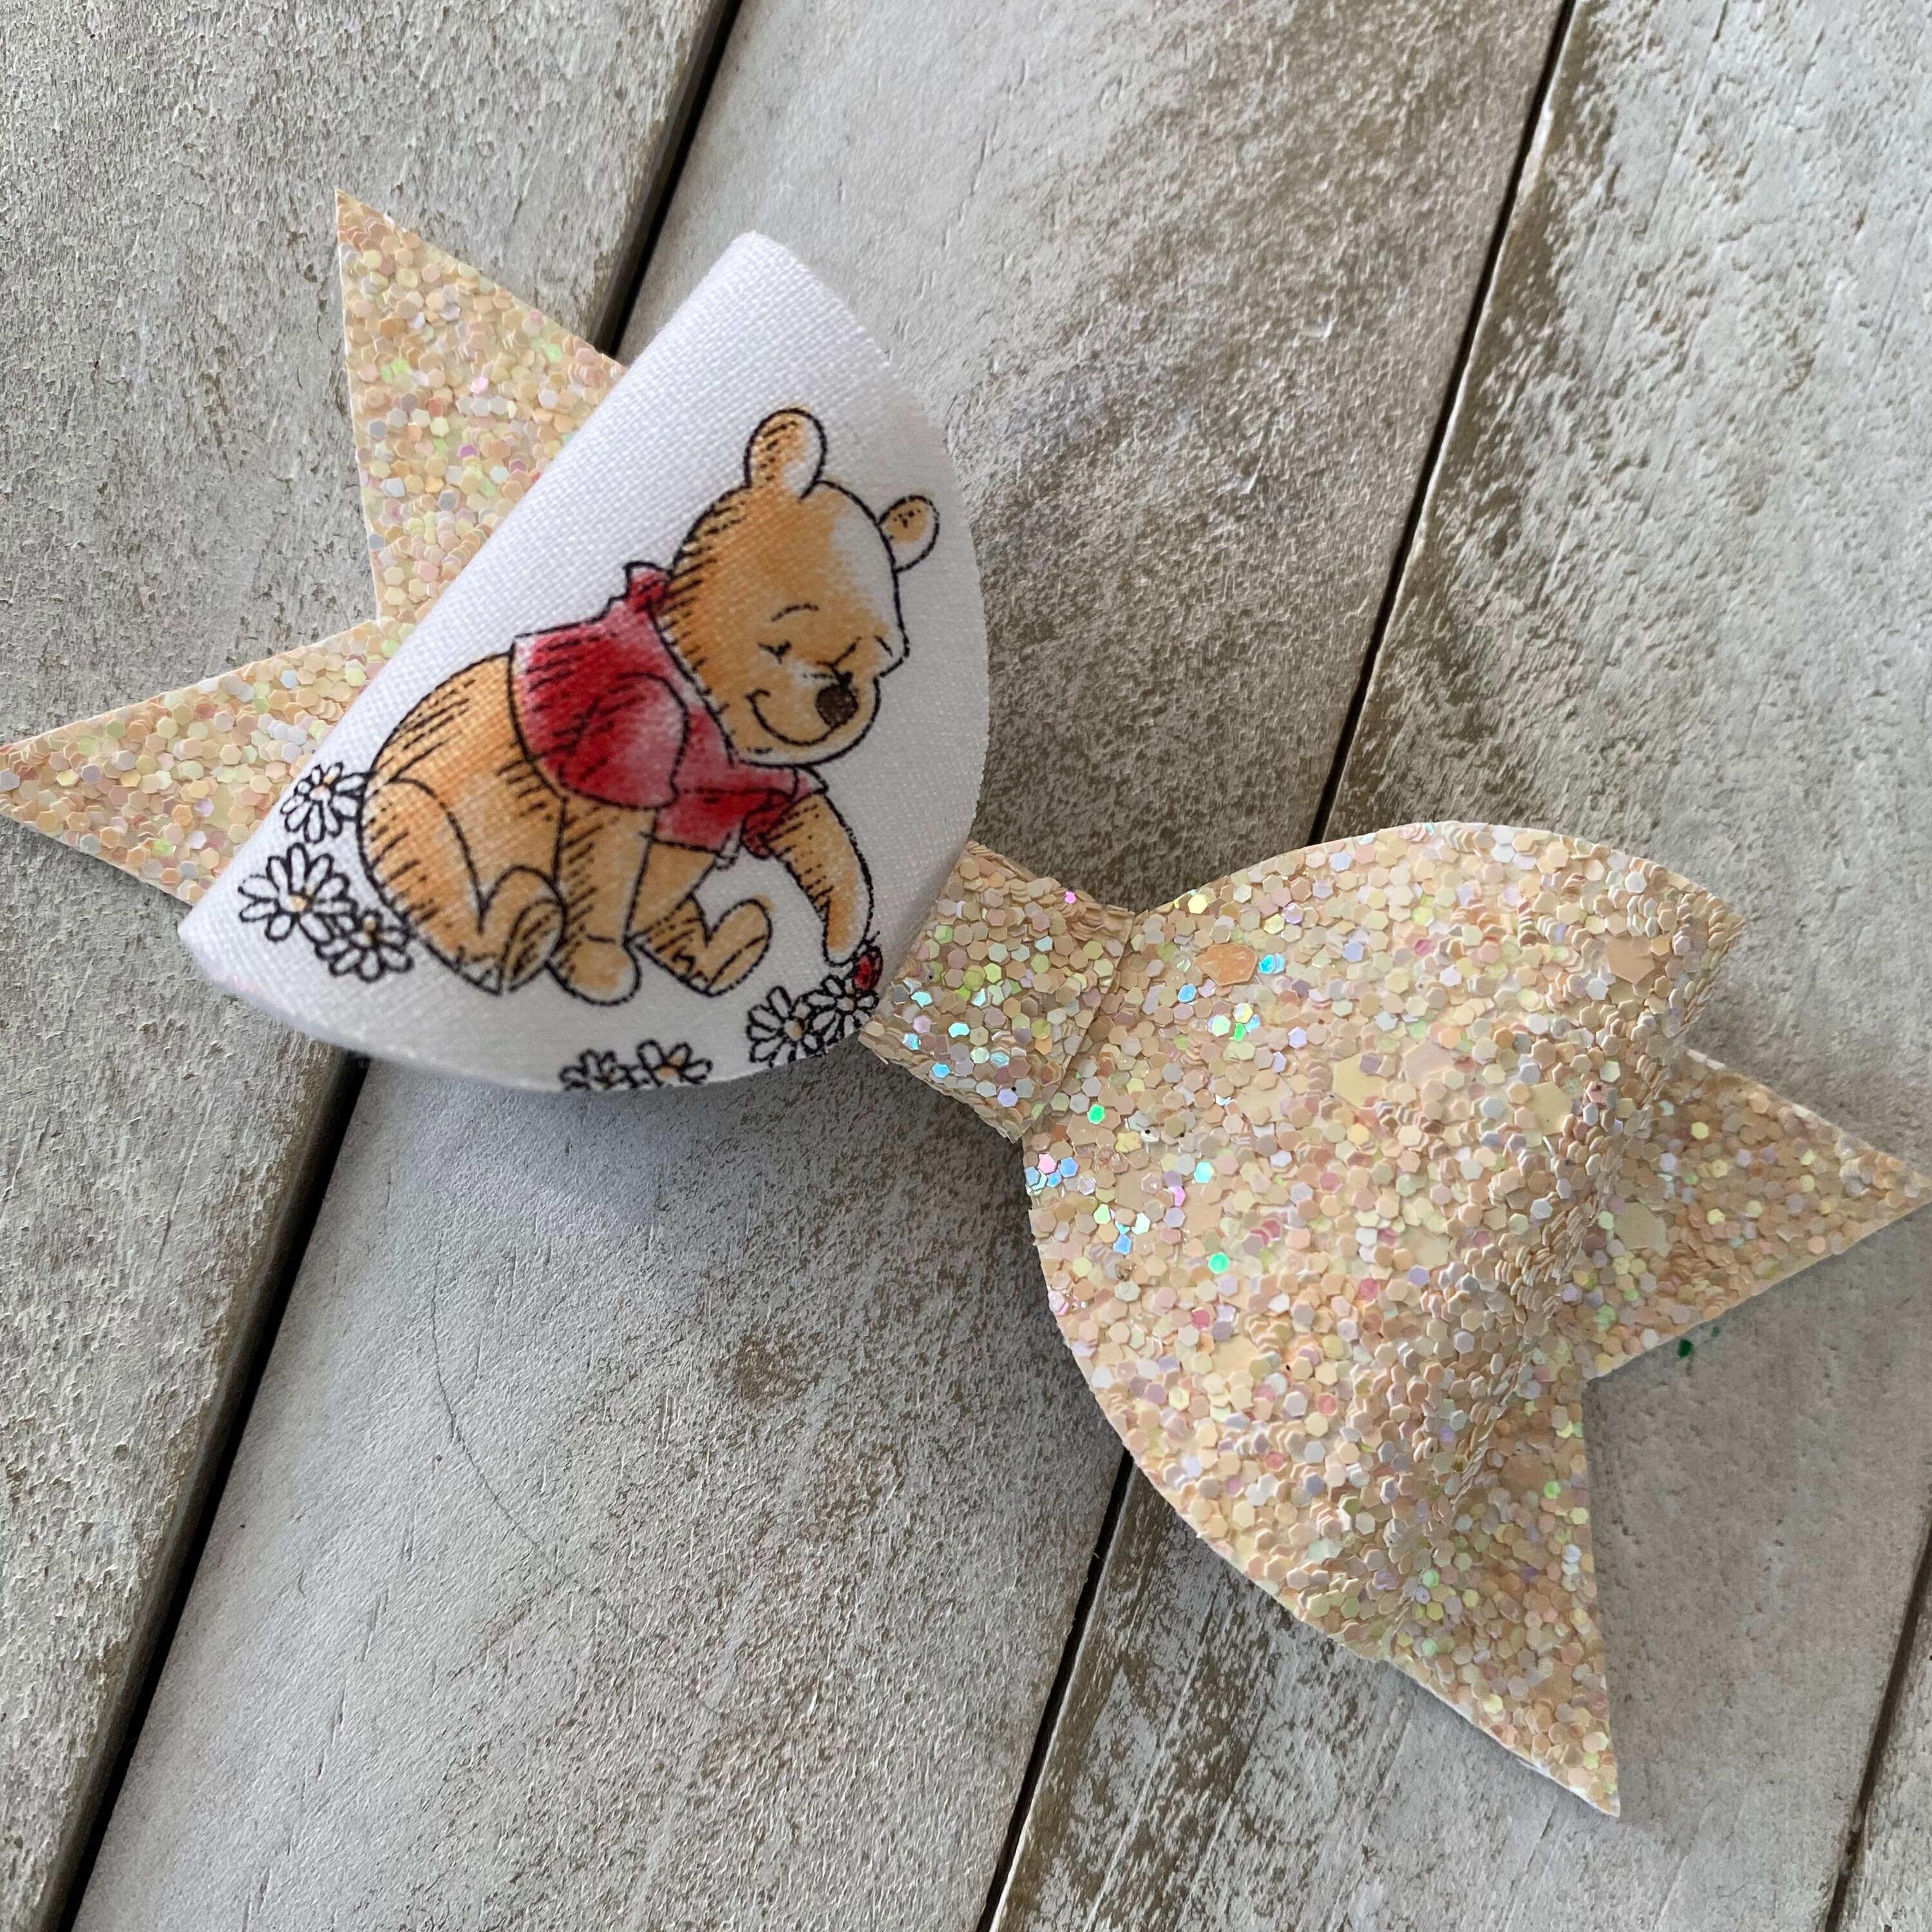 Ribbon Chick - #theribbonchicks 4” Winnie the Pooh Faux Leather Bow 6  available. #fauxleatherbows #hairbows #bows #winniethepooh  #winniethepoohbow #poohhairbow